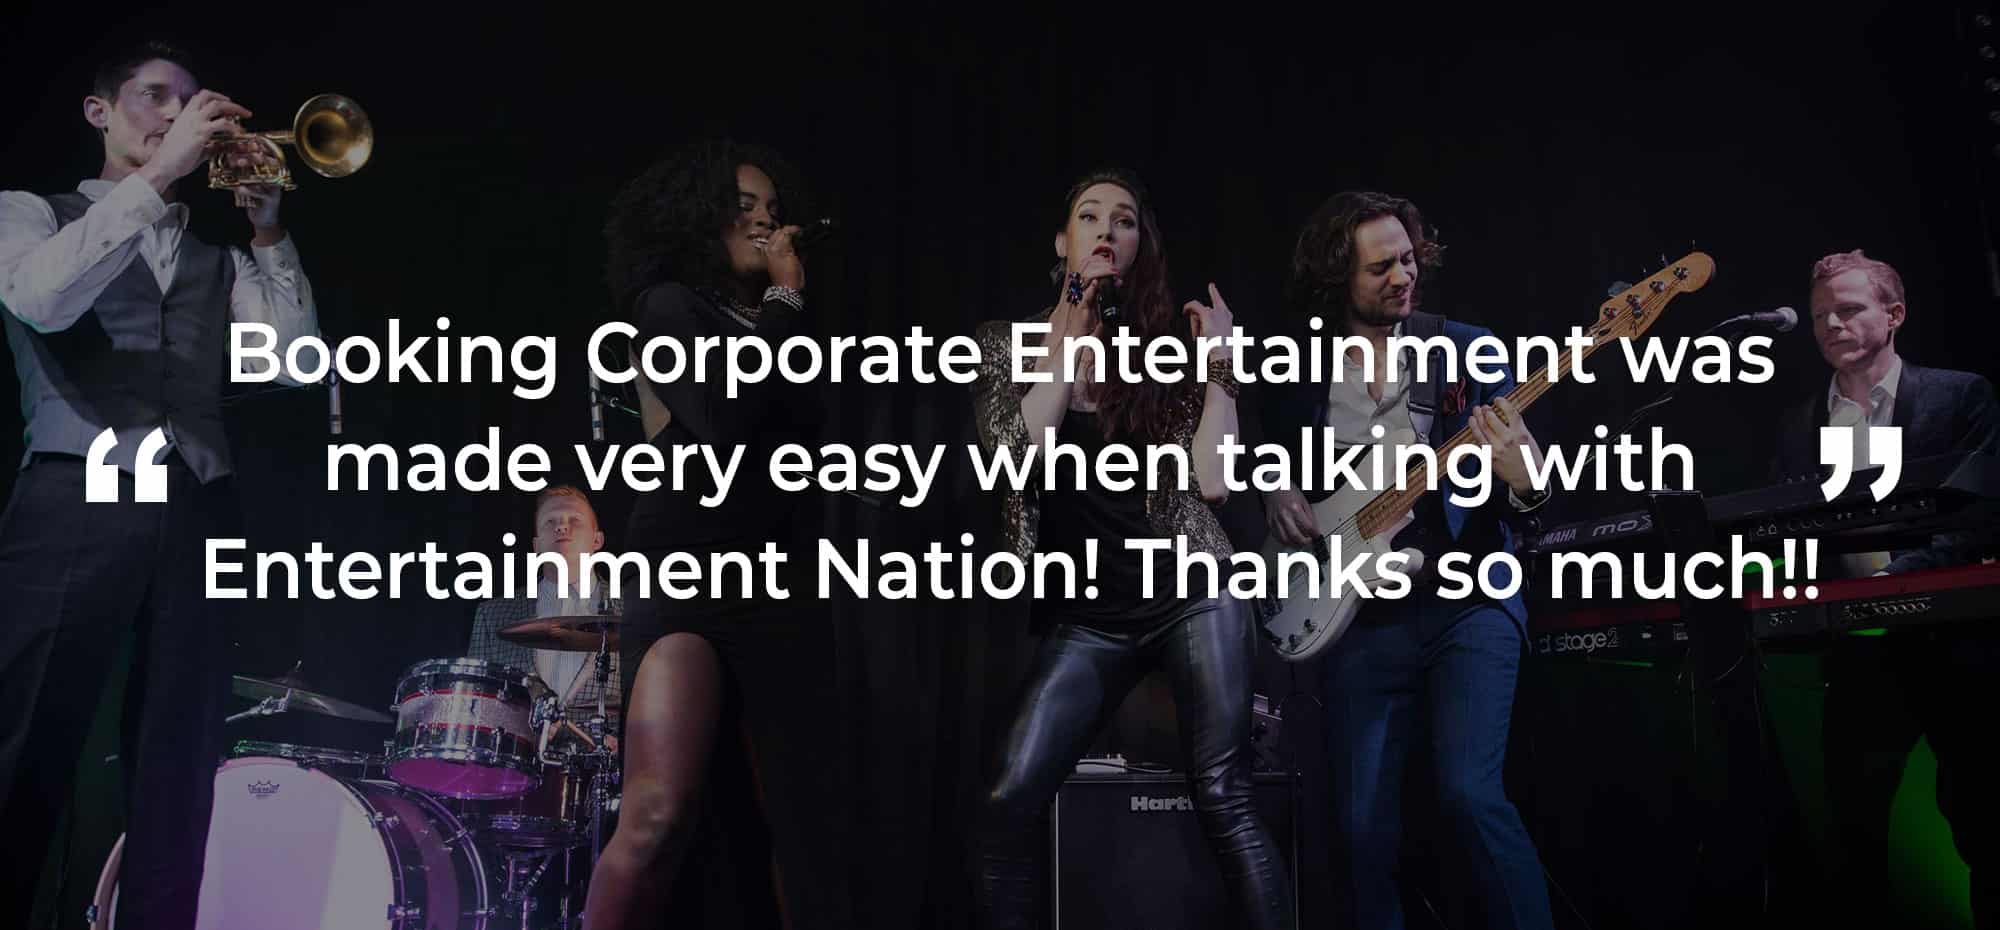 Review of Corporate Entertainment Liverpool